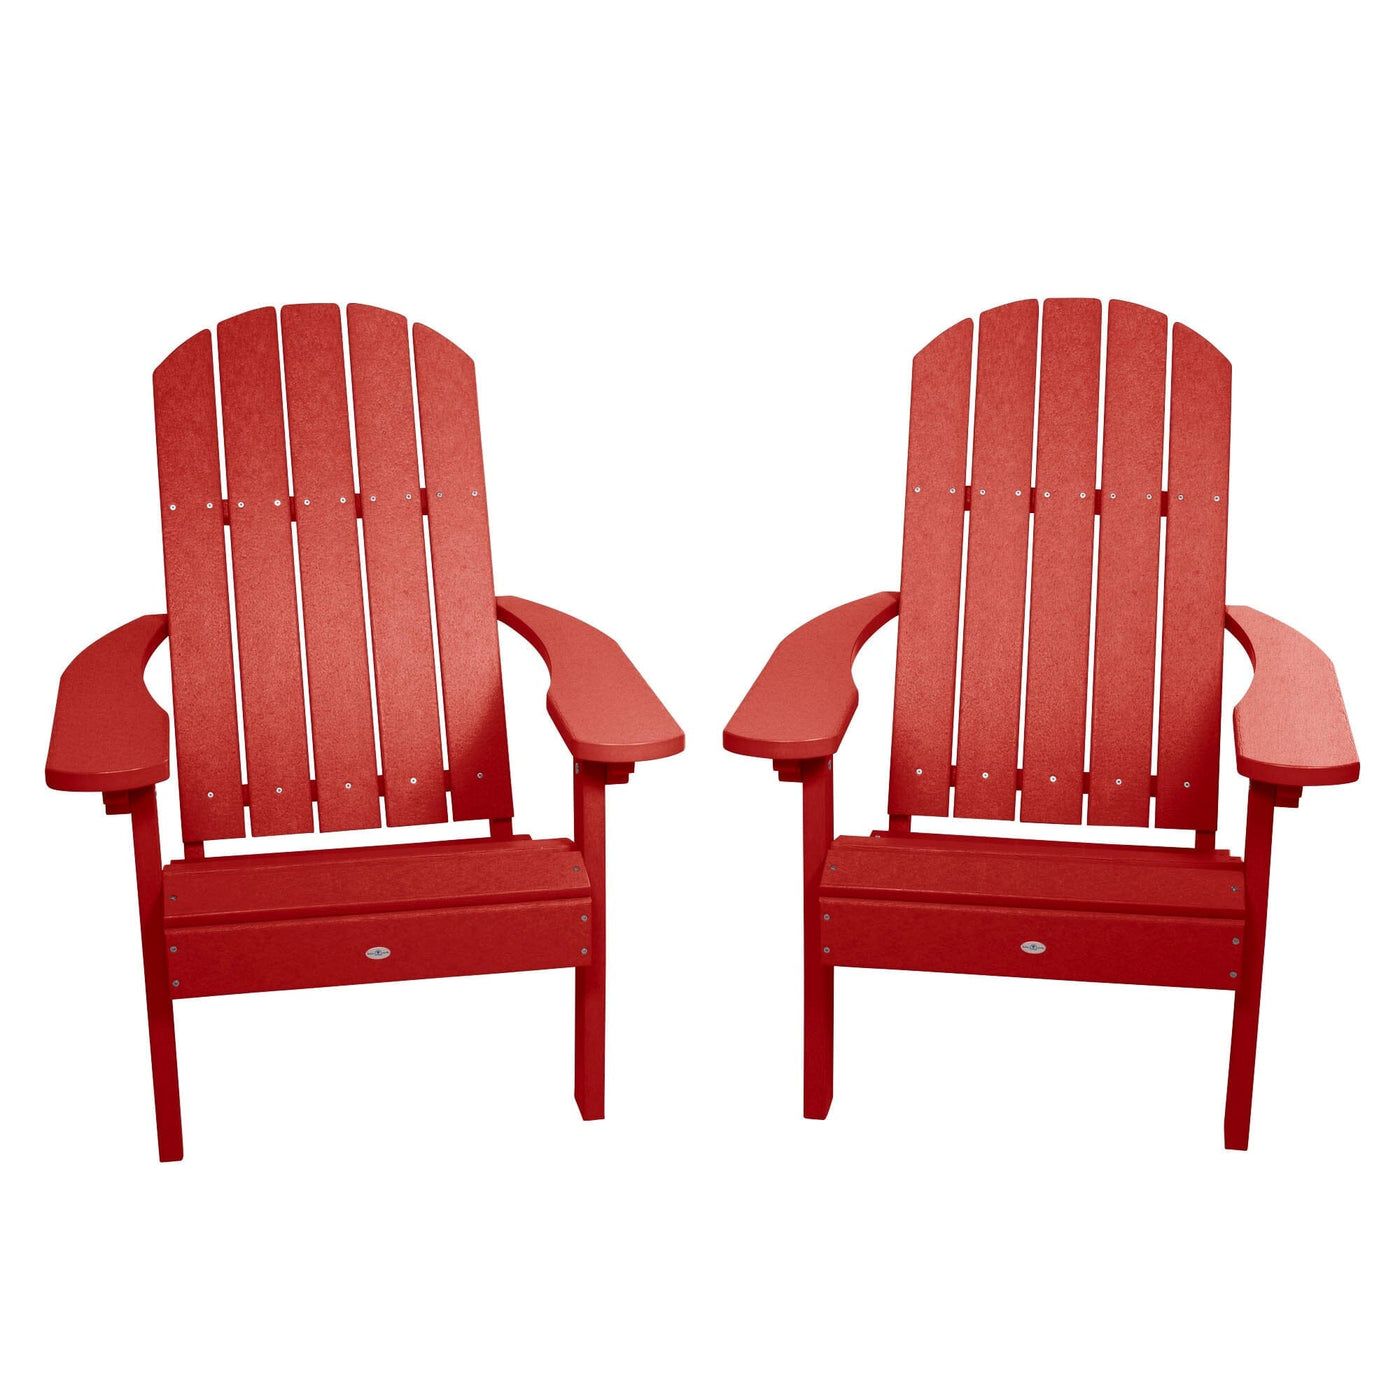 Cape Classic Adirondack Chair (Set of 2) Kitted Set Bahia Verde Outdoors Boathouse Red 